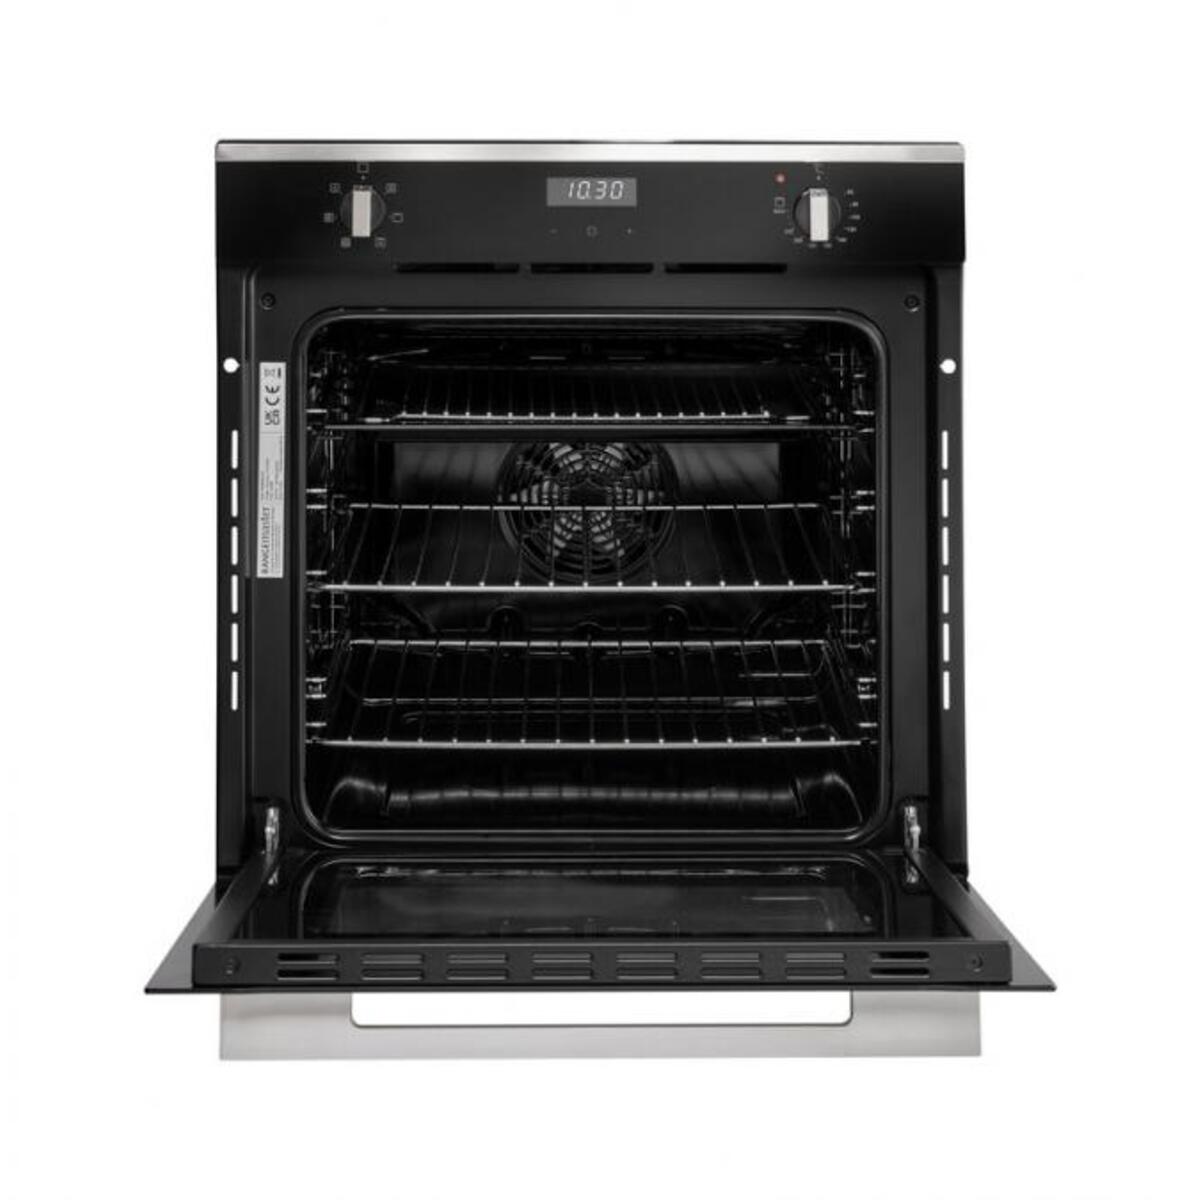 Rangemaster RMB606BLSS 60cm Built-in Oven with 6 Cooking Functions